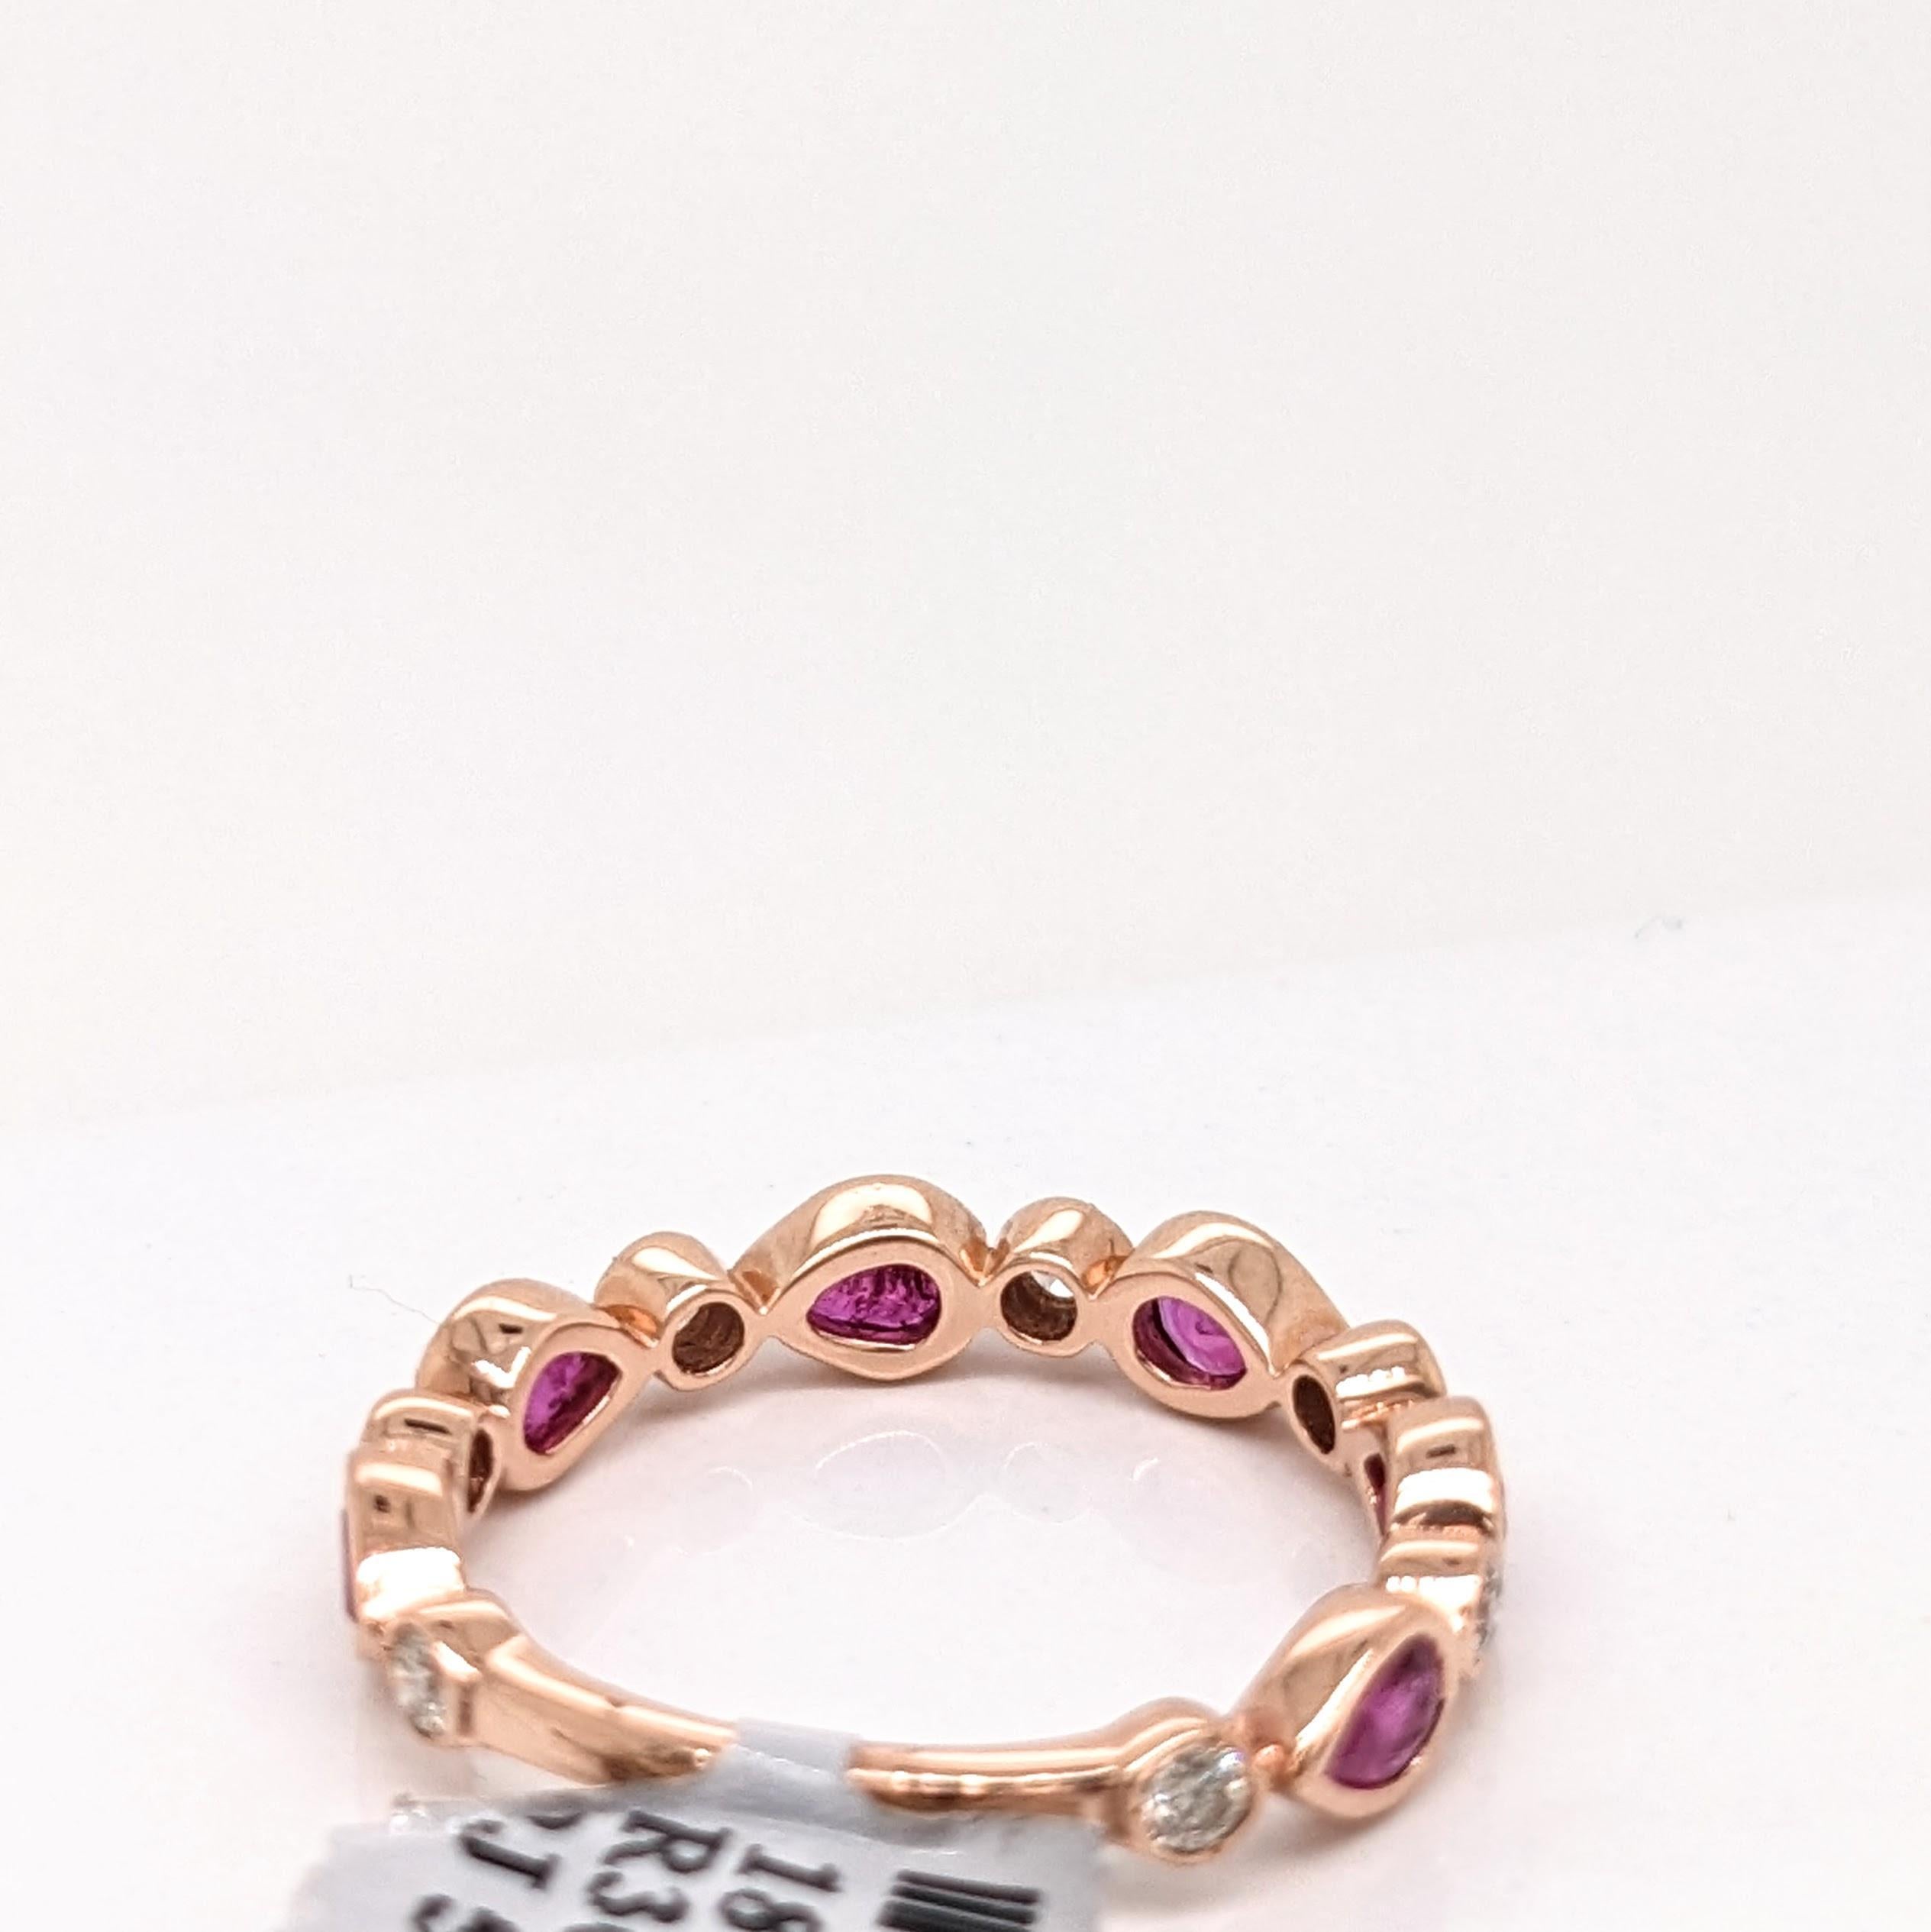 Women's Bezel Set Pear Shape Ruby Band Ring w Natural Diamonds in Solid 14k Rose Gold For Sale